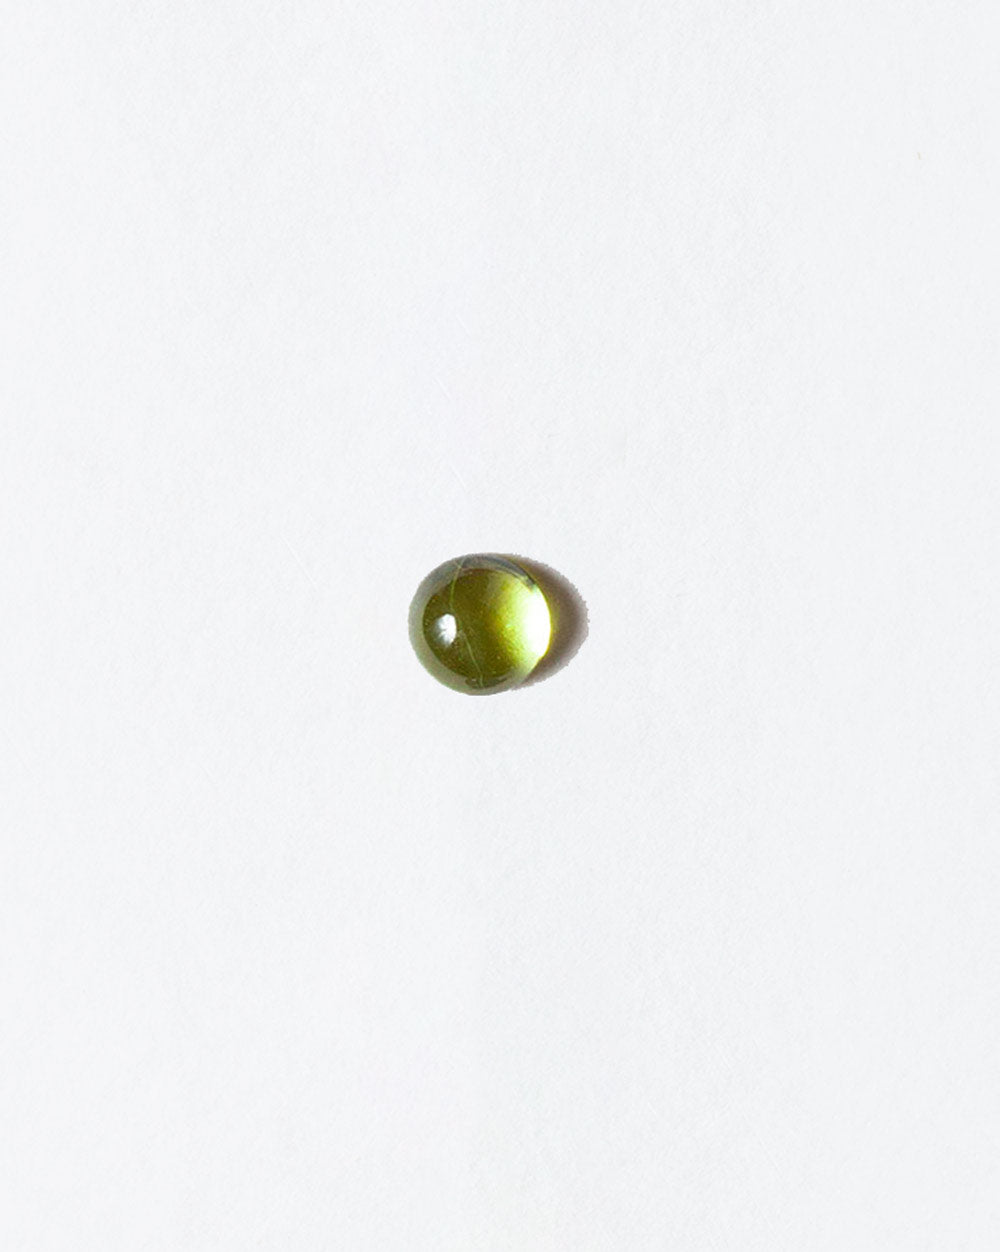 Peridot cabochon on light color background.